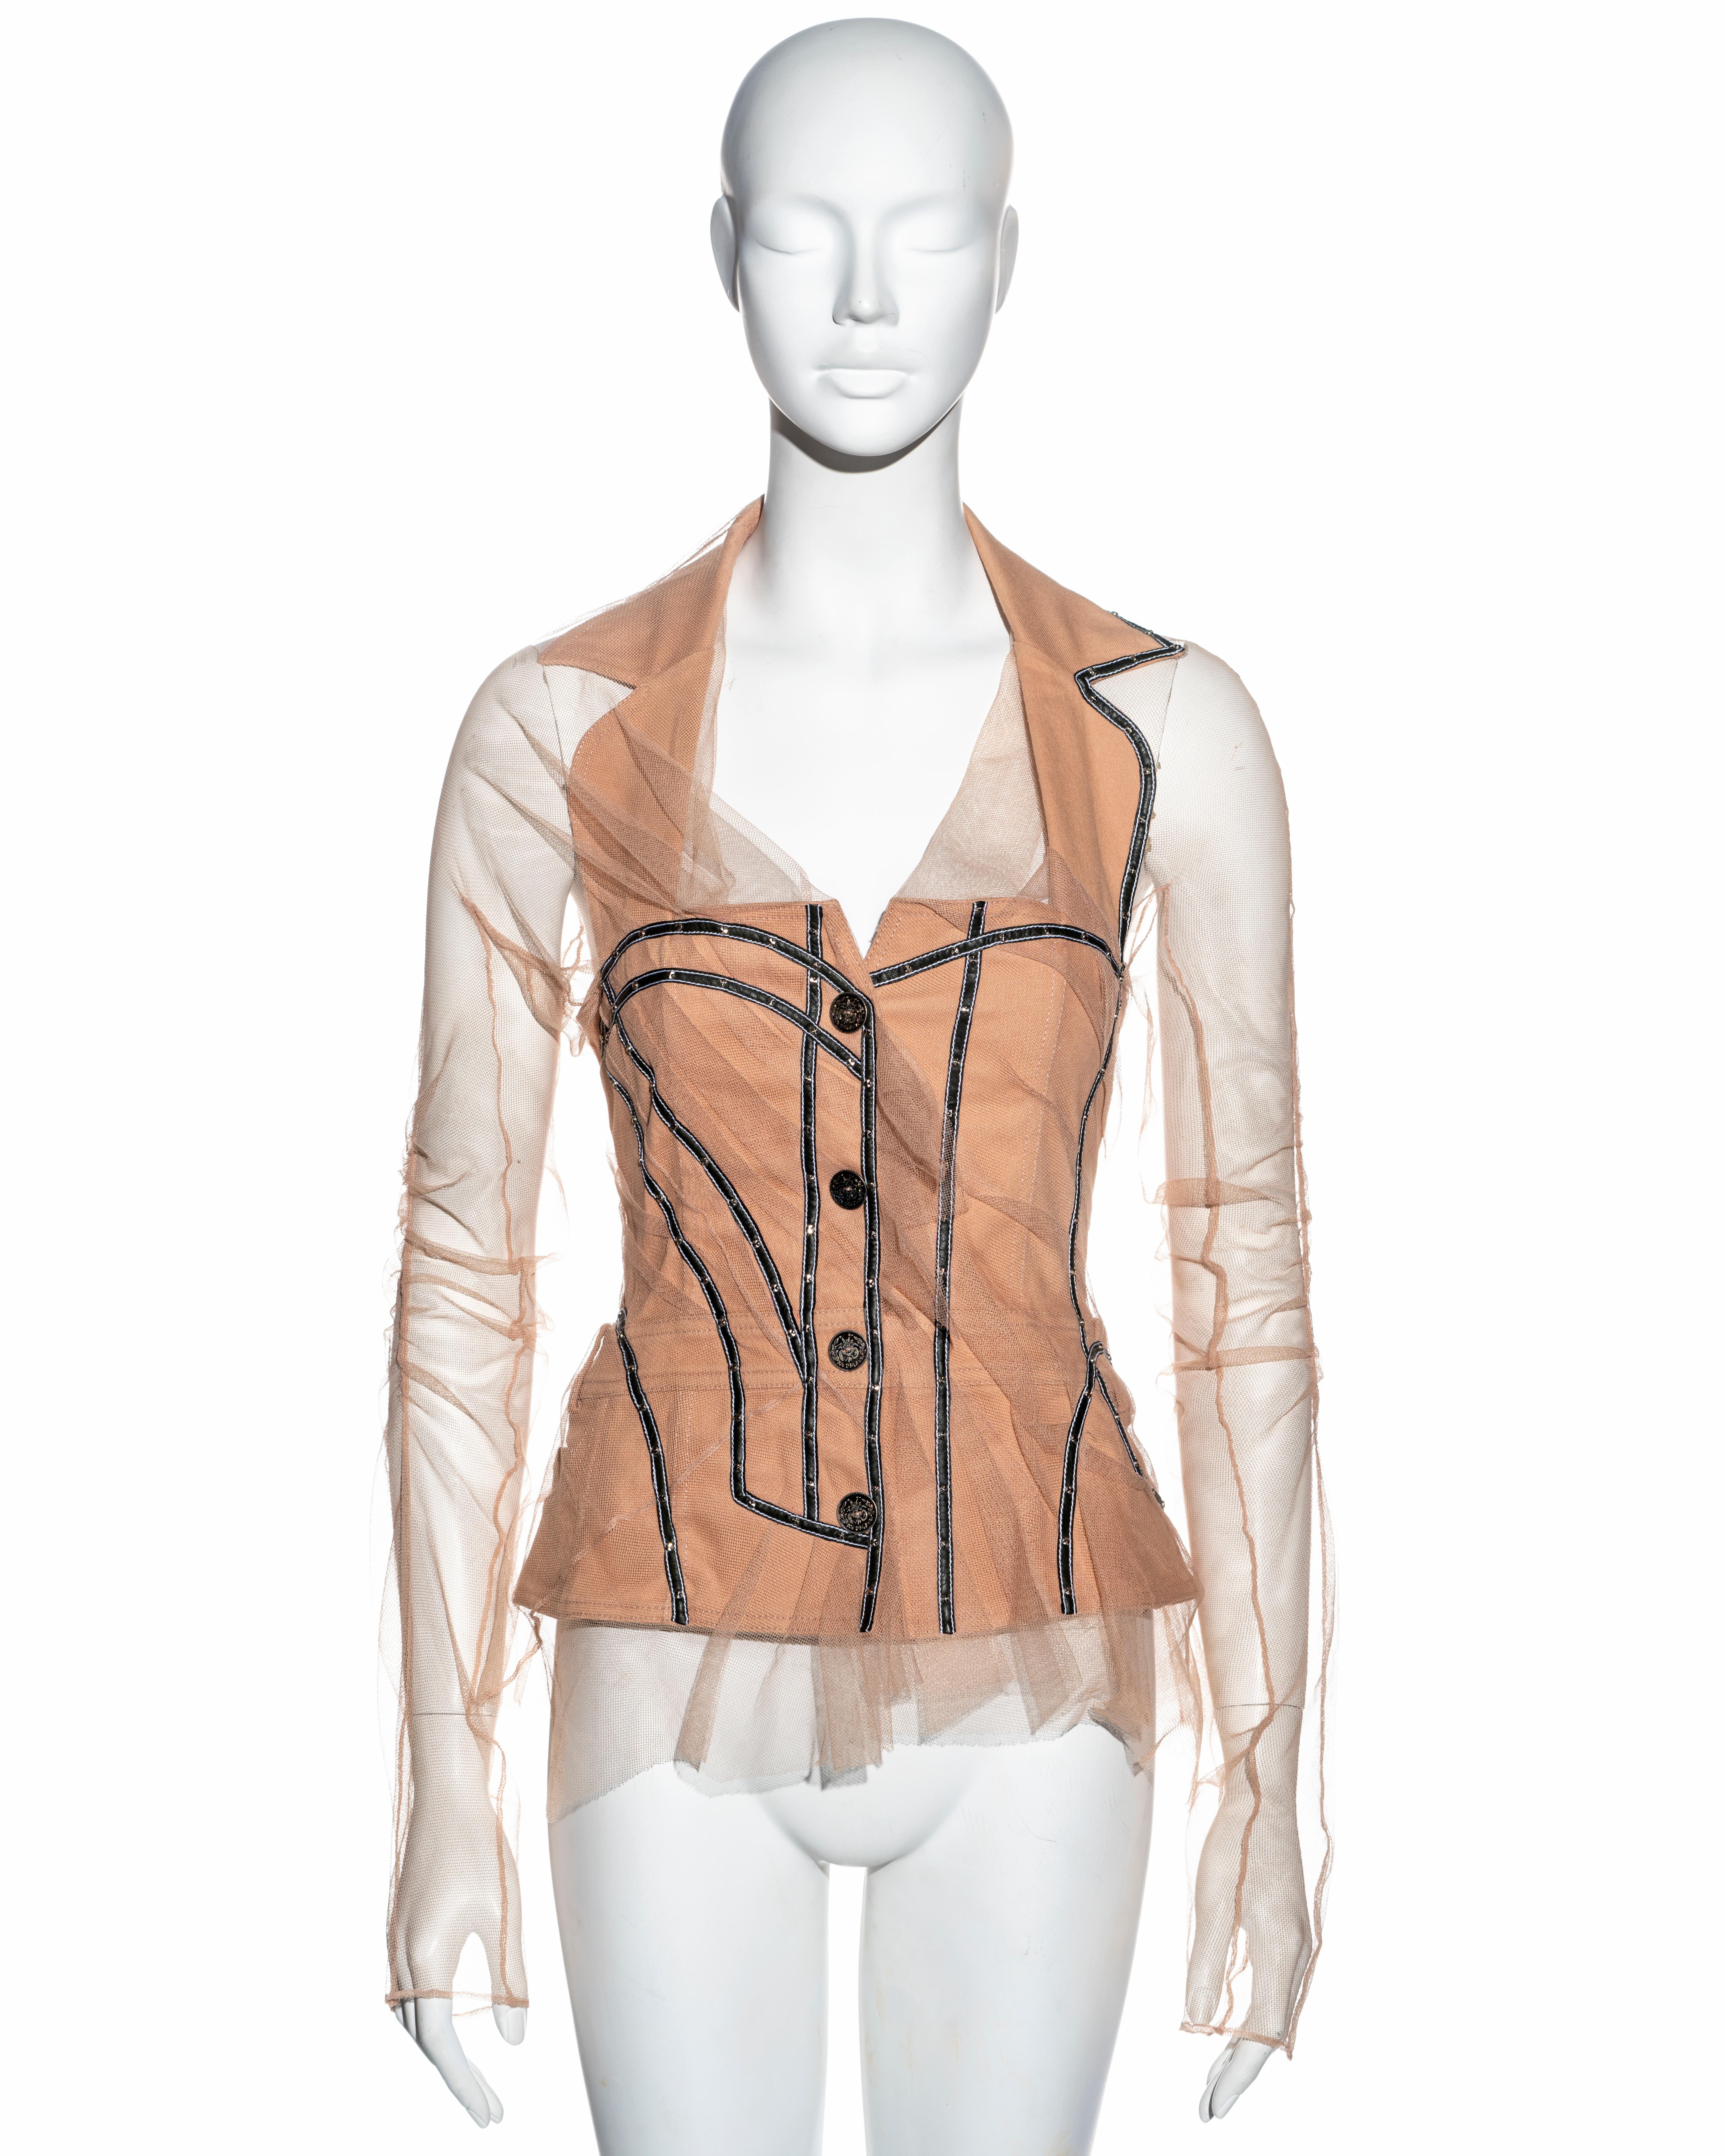 ▪ Christian Dior deconstructed jacket
▪ Designed by John Galliano
▪ Sold by One of a Kind Archive
▪ Constructed from peach cotton 
▪ Long pleated mesh sleeves and overlay 
▪ Studded leather trim 
▪ Halterneck lapel 
▪ Coin-style buttons 
▪ FR 38 -